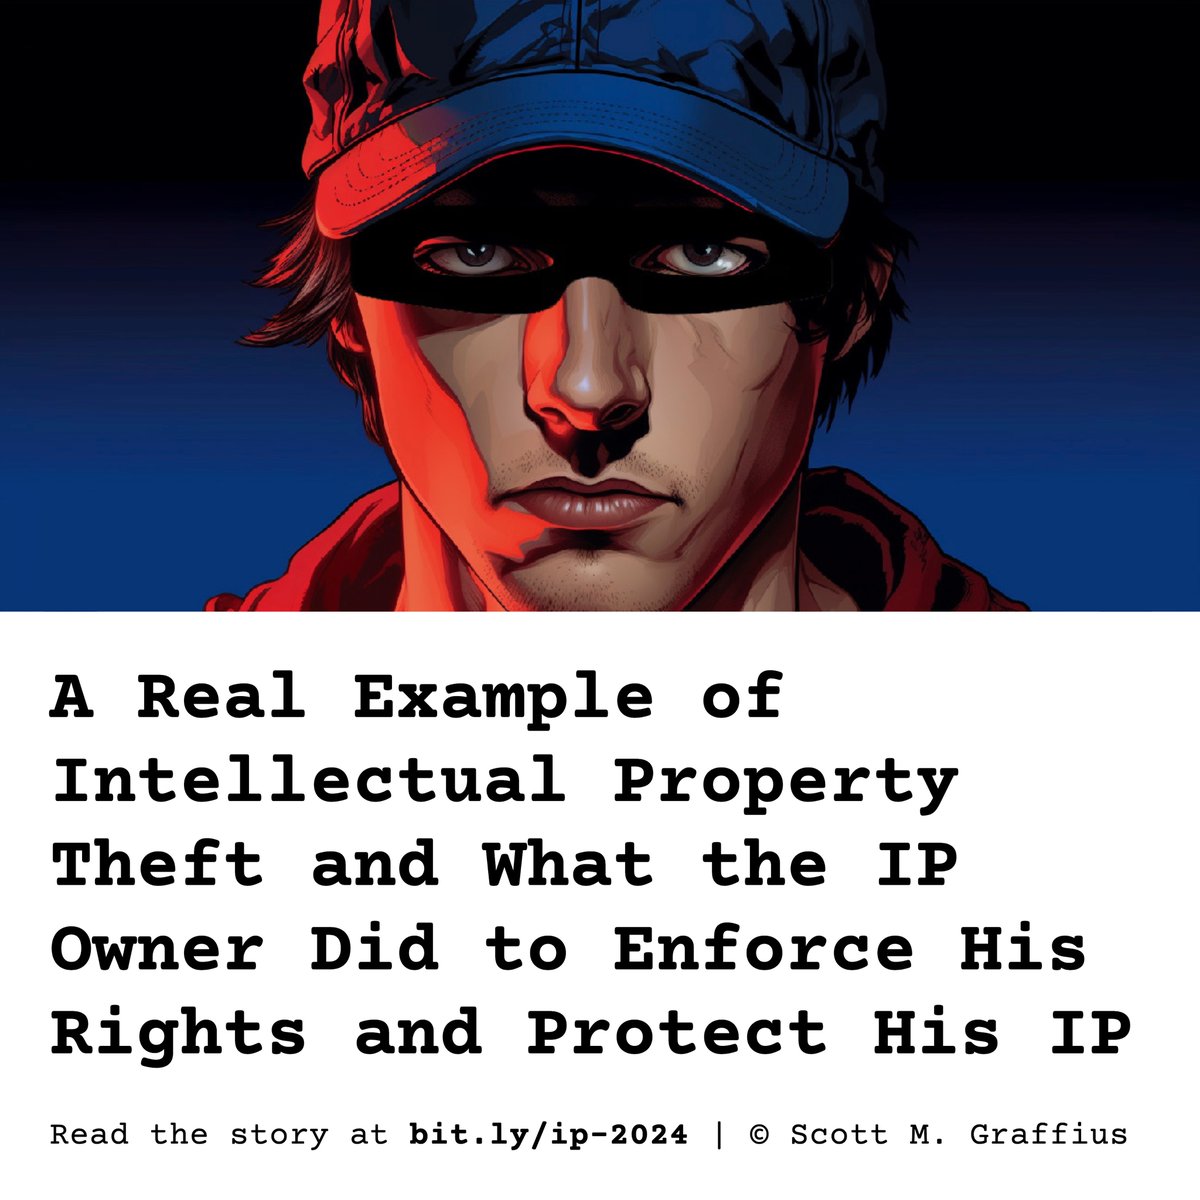 A Real Example of Intellectual Property Theft and What the IP Owner Did to Enforce His Rights and Protect His IP

Read the story 👉 bit.ly/ip-2024

#IP #IntellectualProperty #Copyright #NFT #NFTs #Blockchain #Web3 #IPRights #Copyright #USCO #Innovation #Crypto #Tech